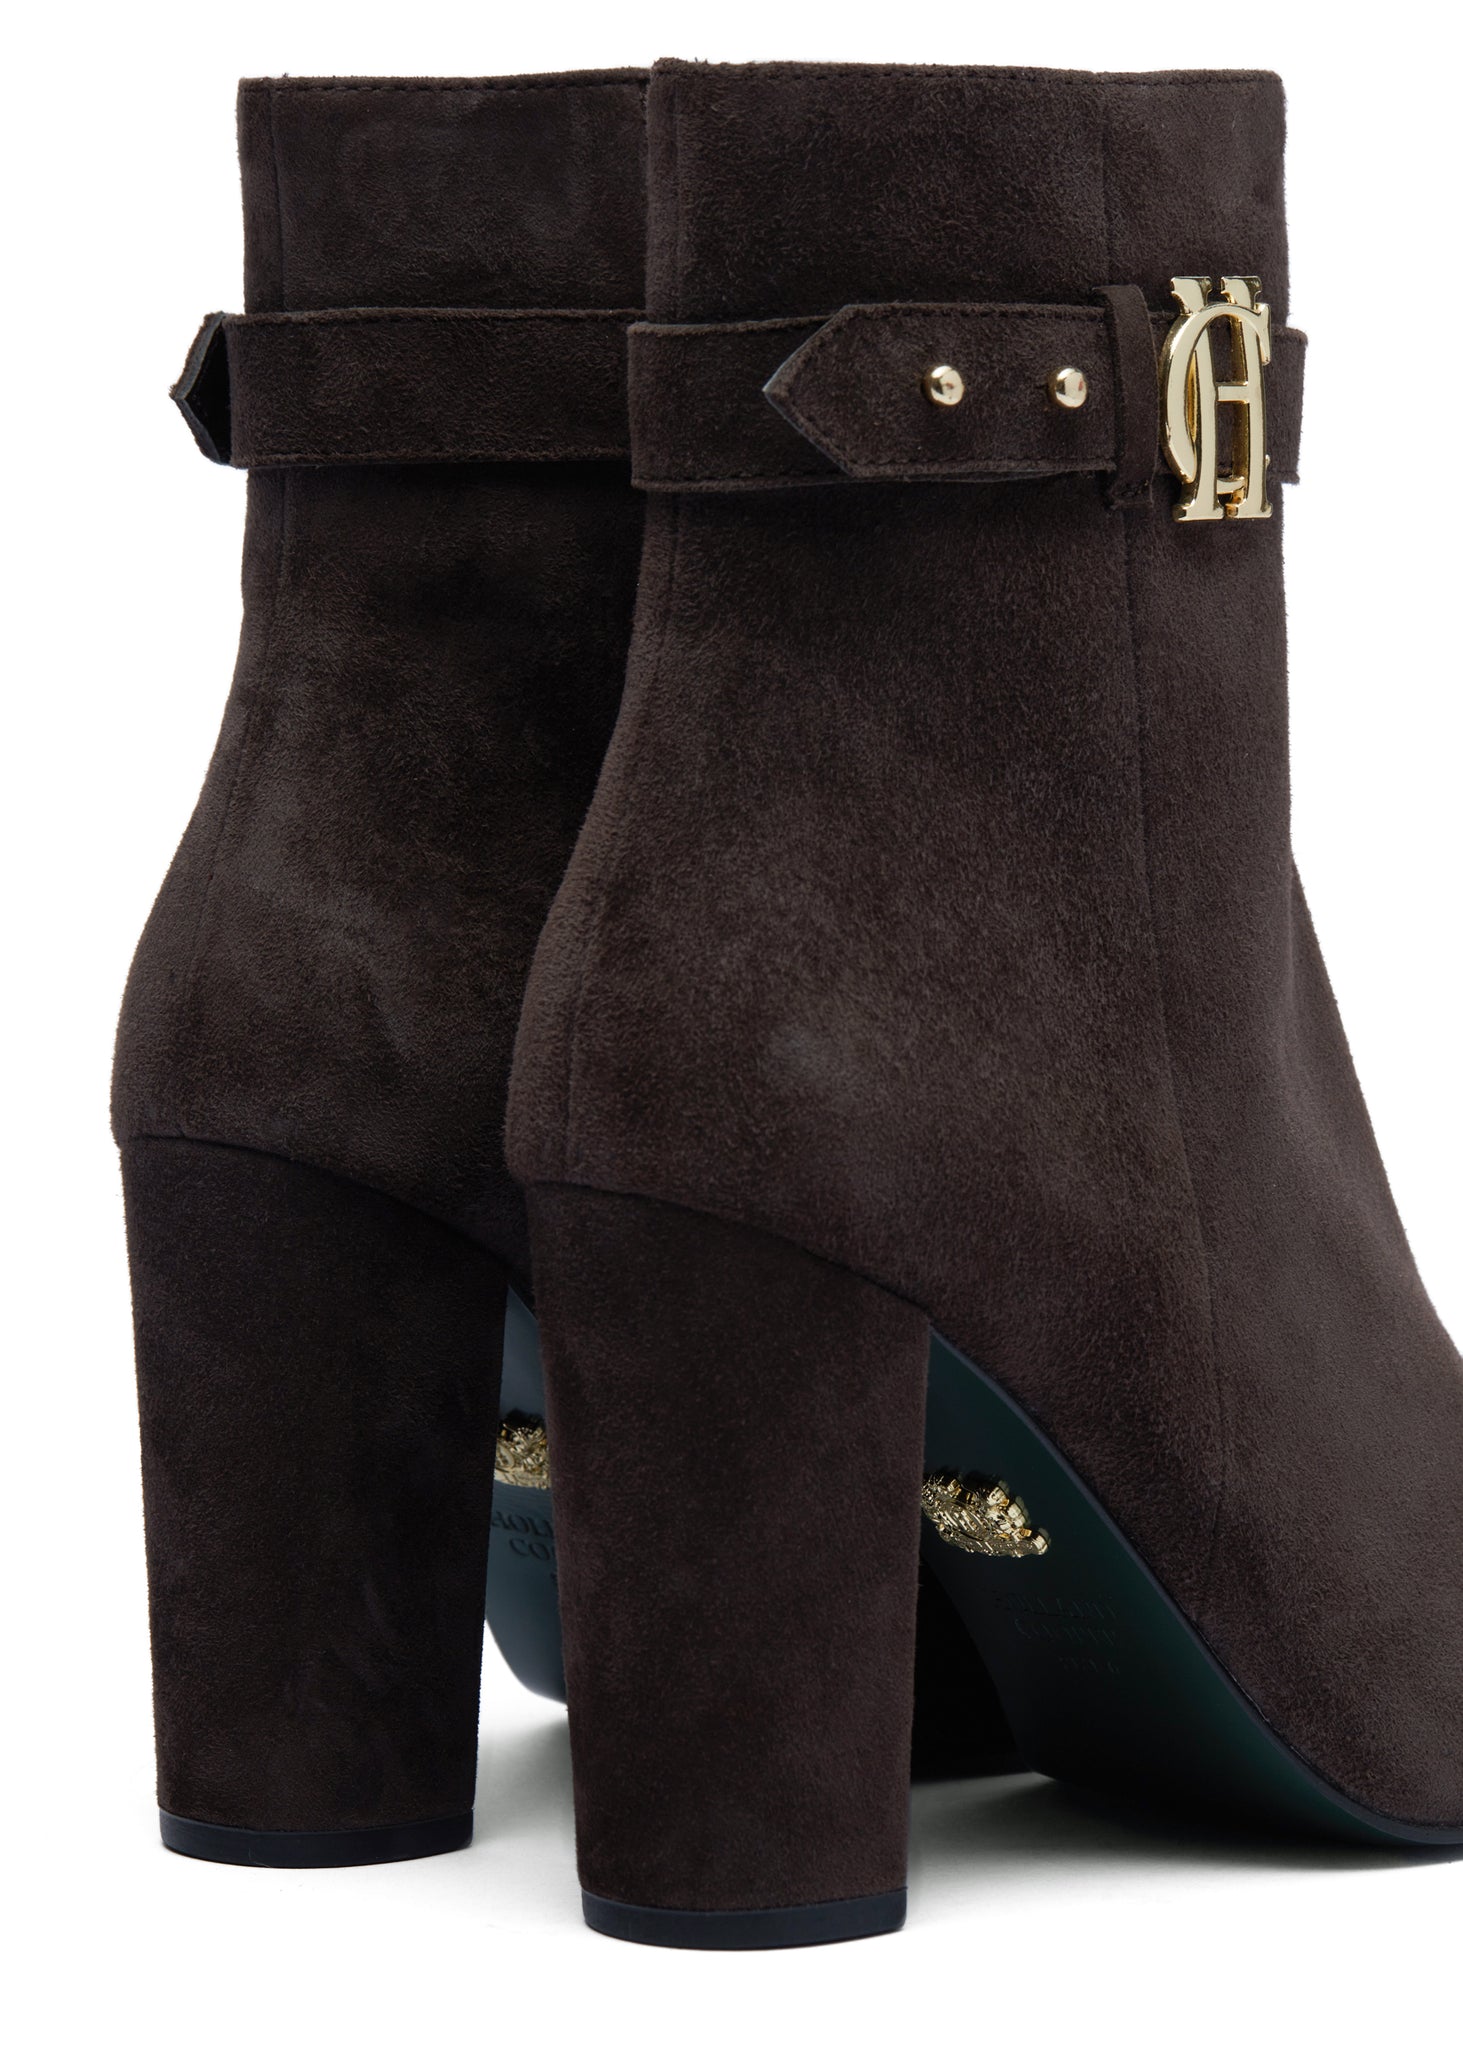 Mayfair Suede Ankle Boot (Chocolate)